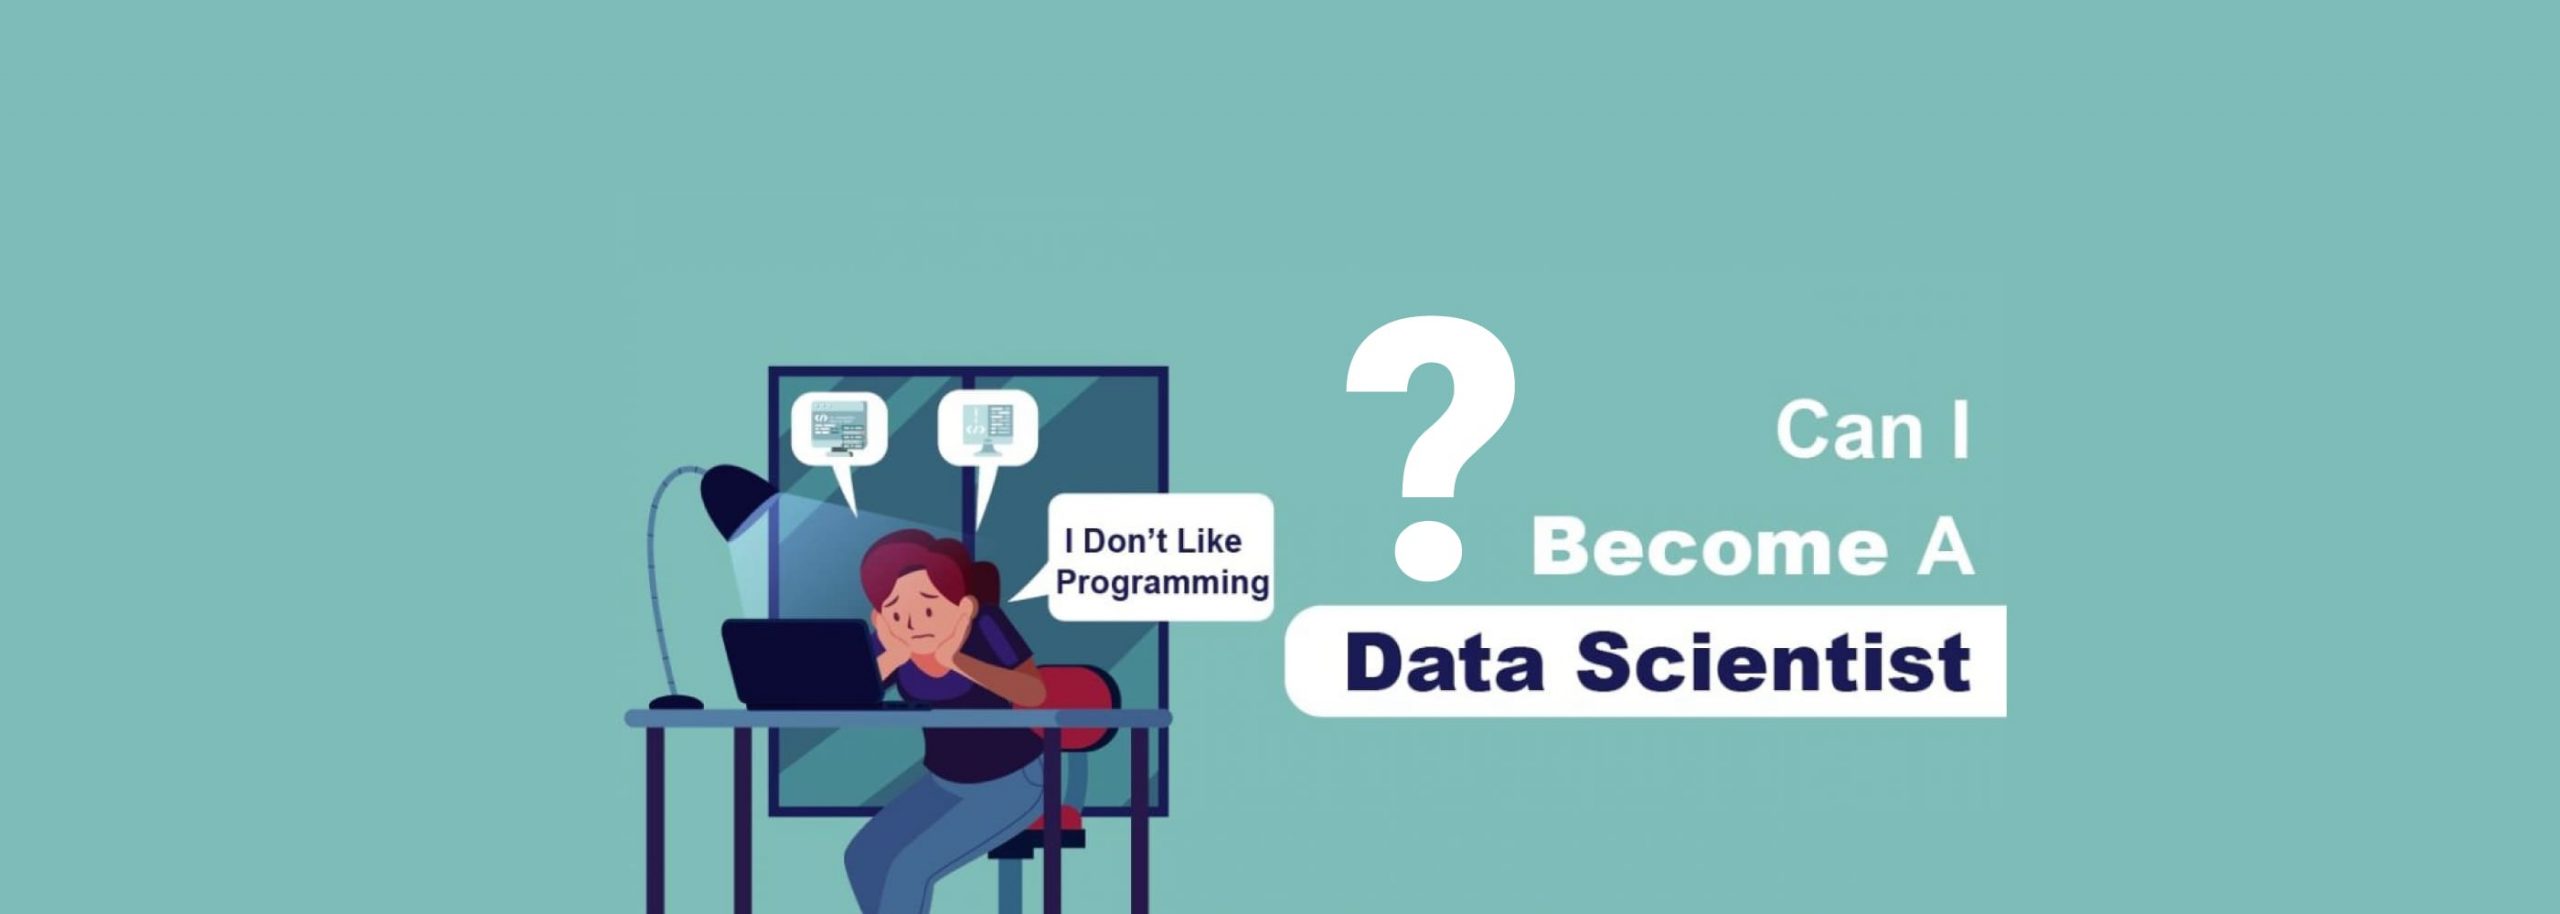 Can I Become a Data Scientist